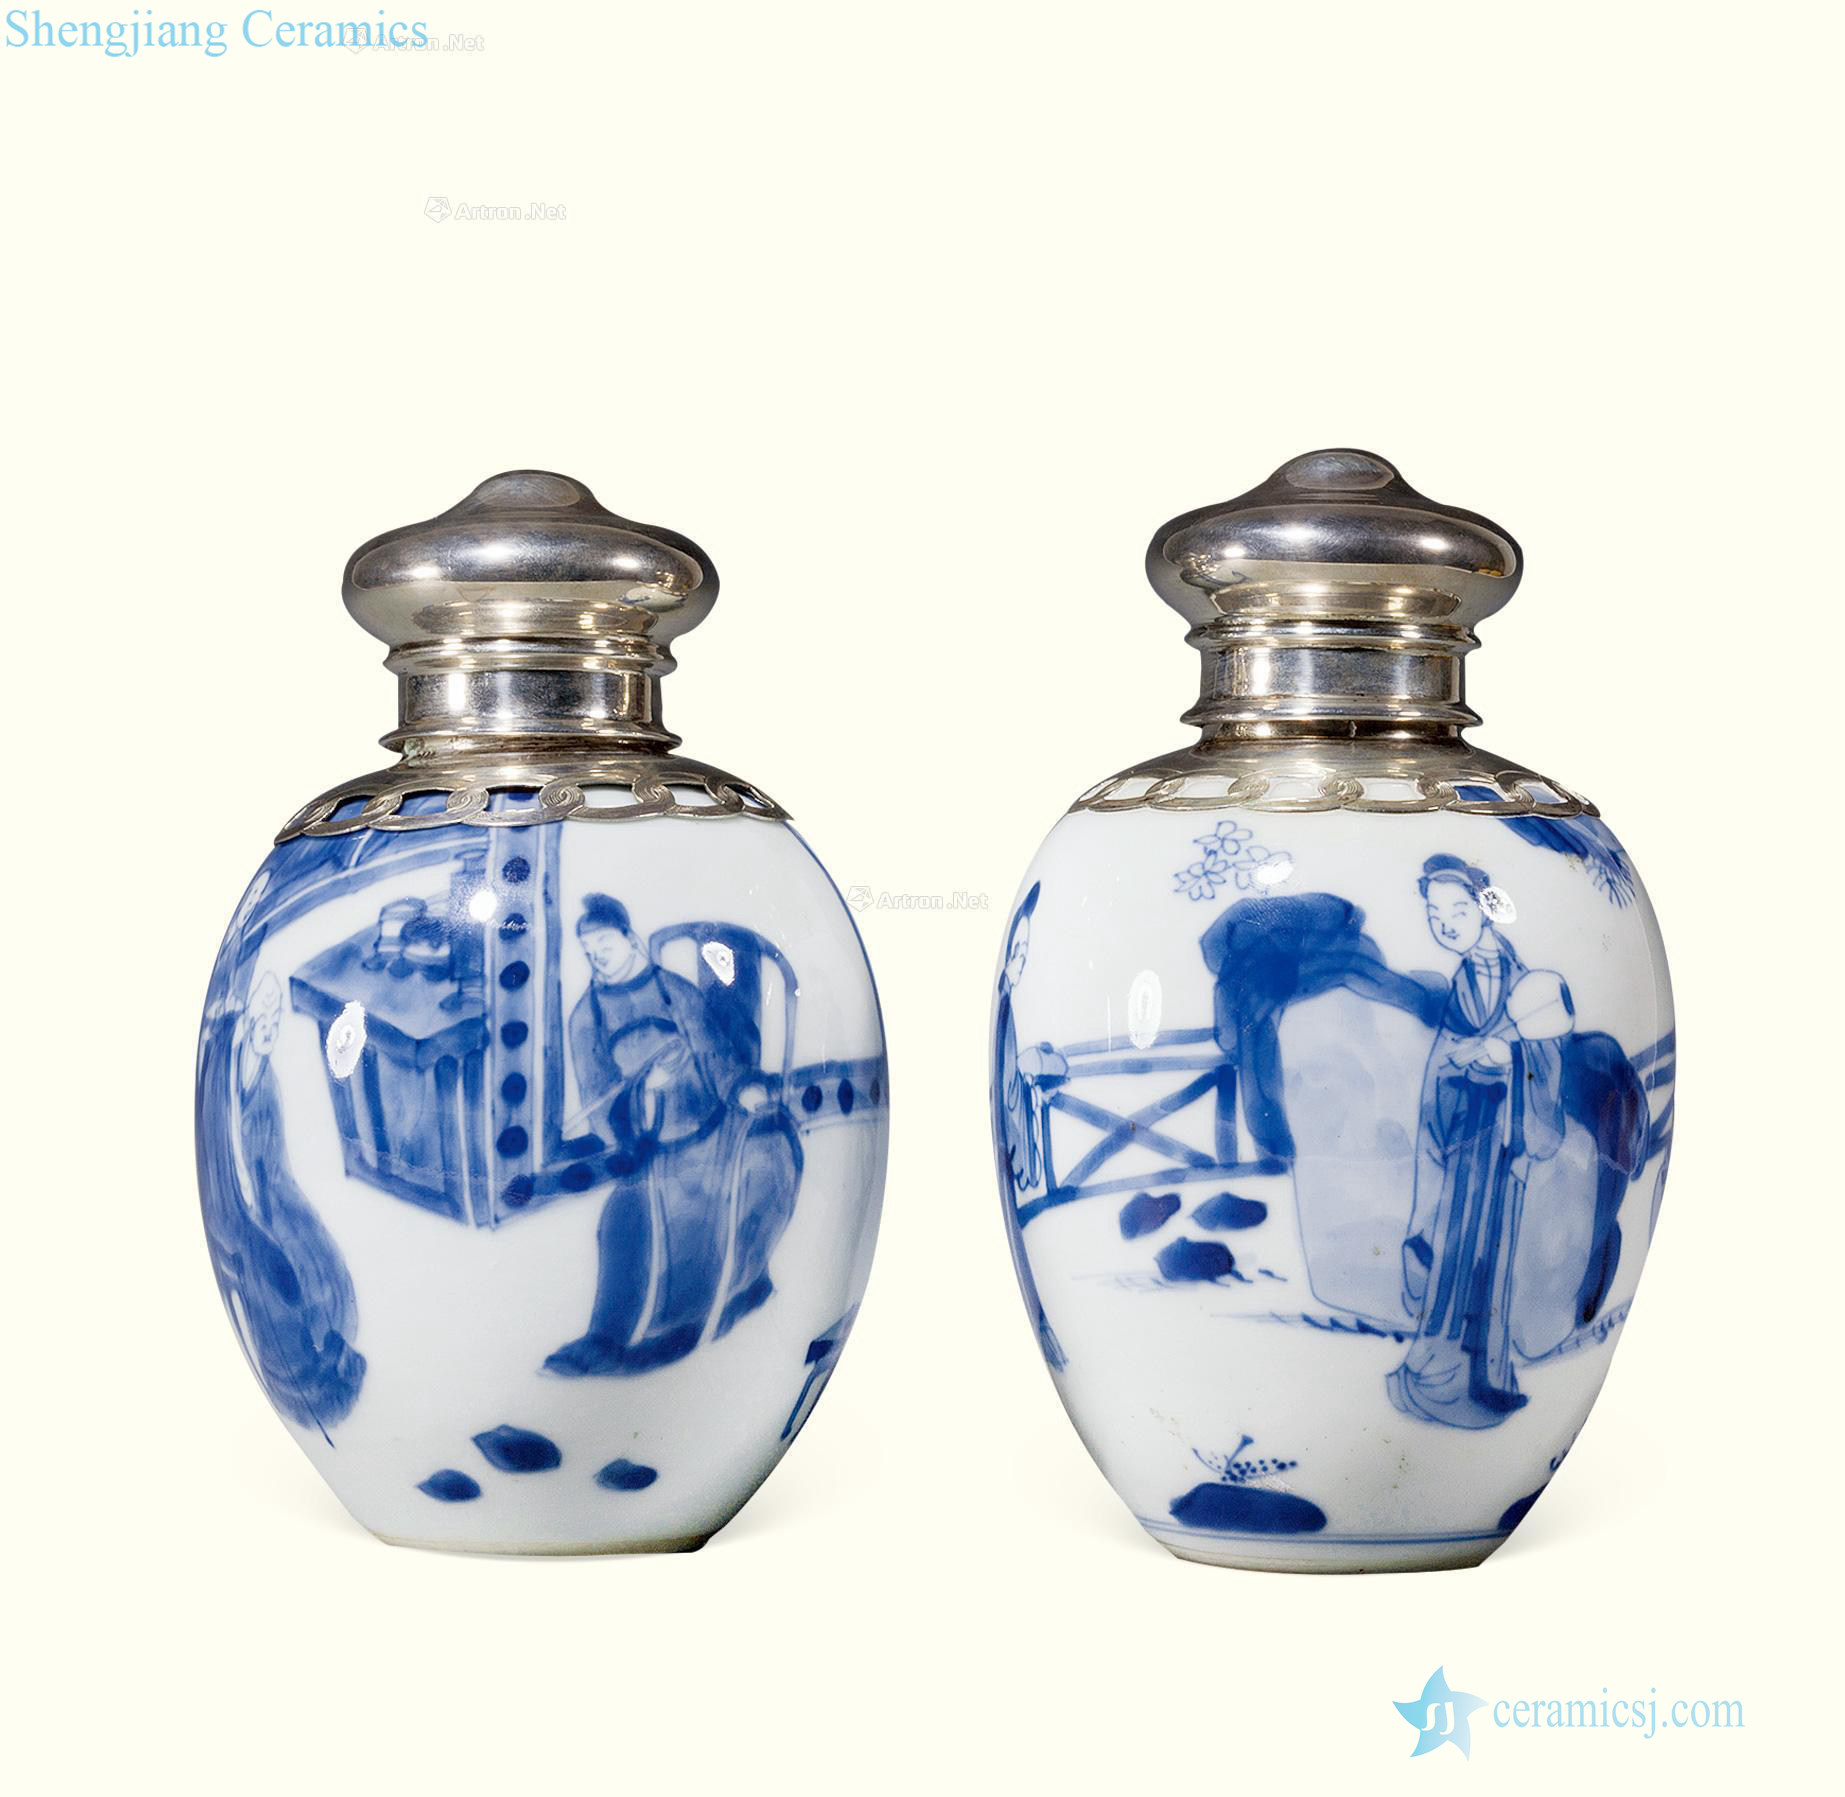 The characters of the reign of emperor kangxi porcelain tea pot